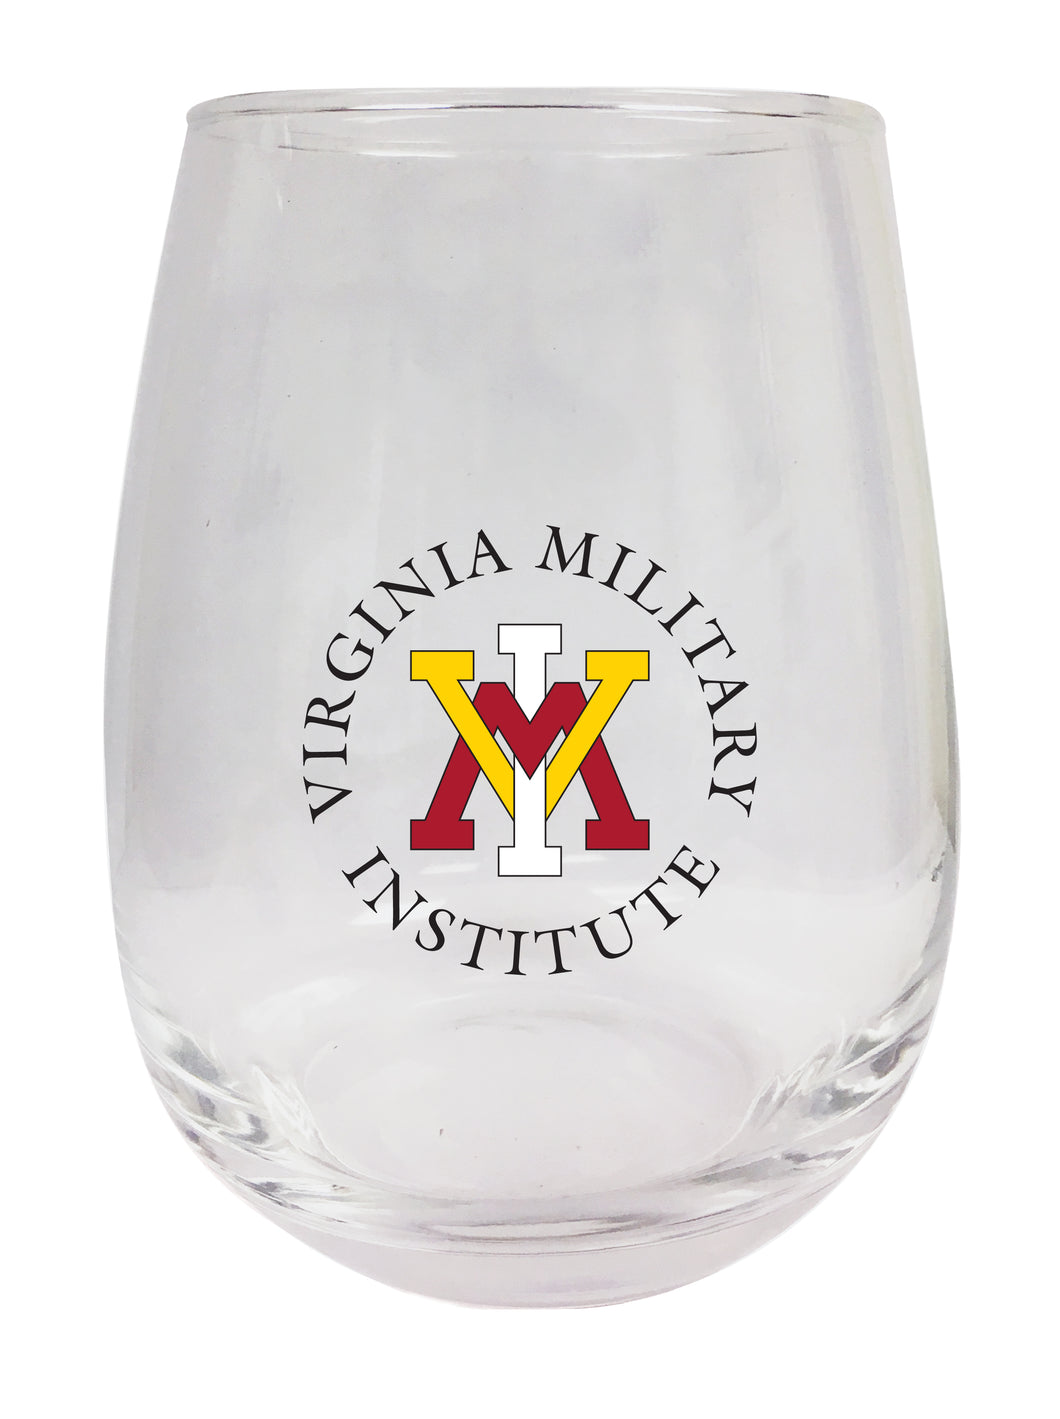 VMI Keydets Stemless Wine Glass - 9 oz. | Officially Licensed NCAA Merchandise